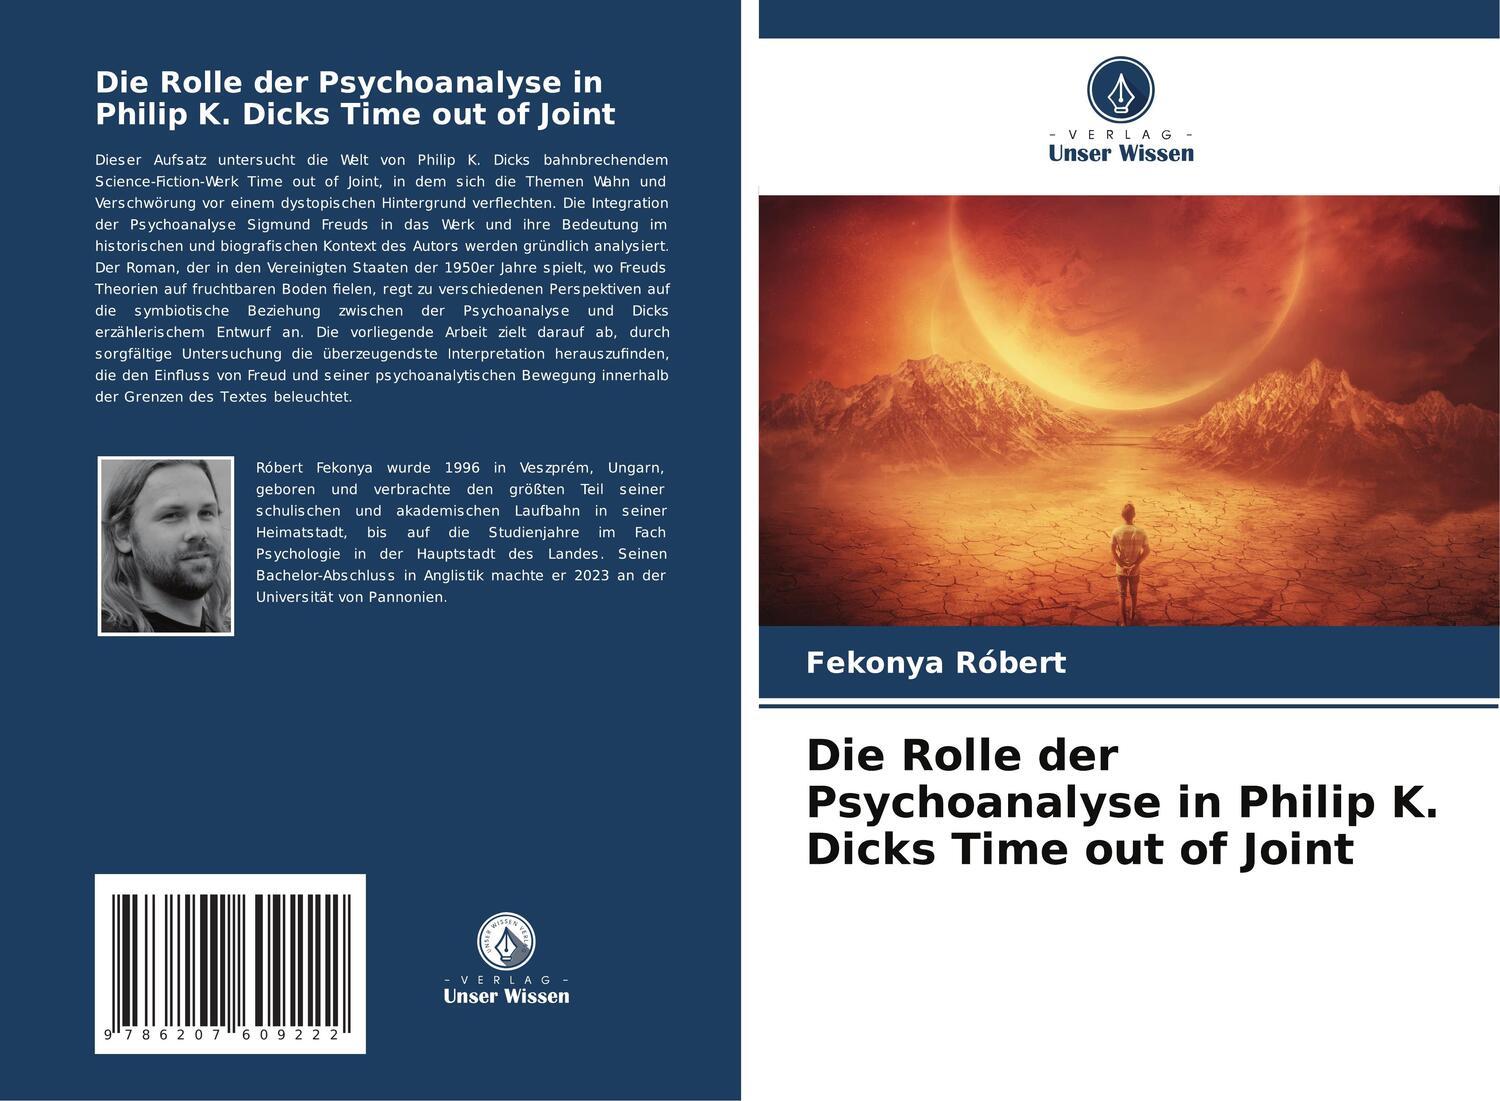 Cover: 9786207609222 | Die Rolle der Psychoanalyse in Philip K. Dicks Time out of Joint